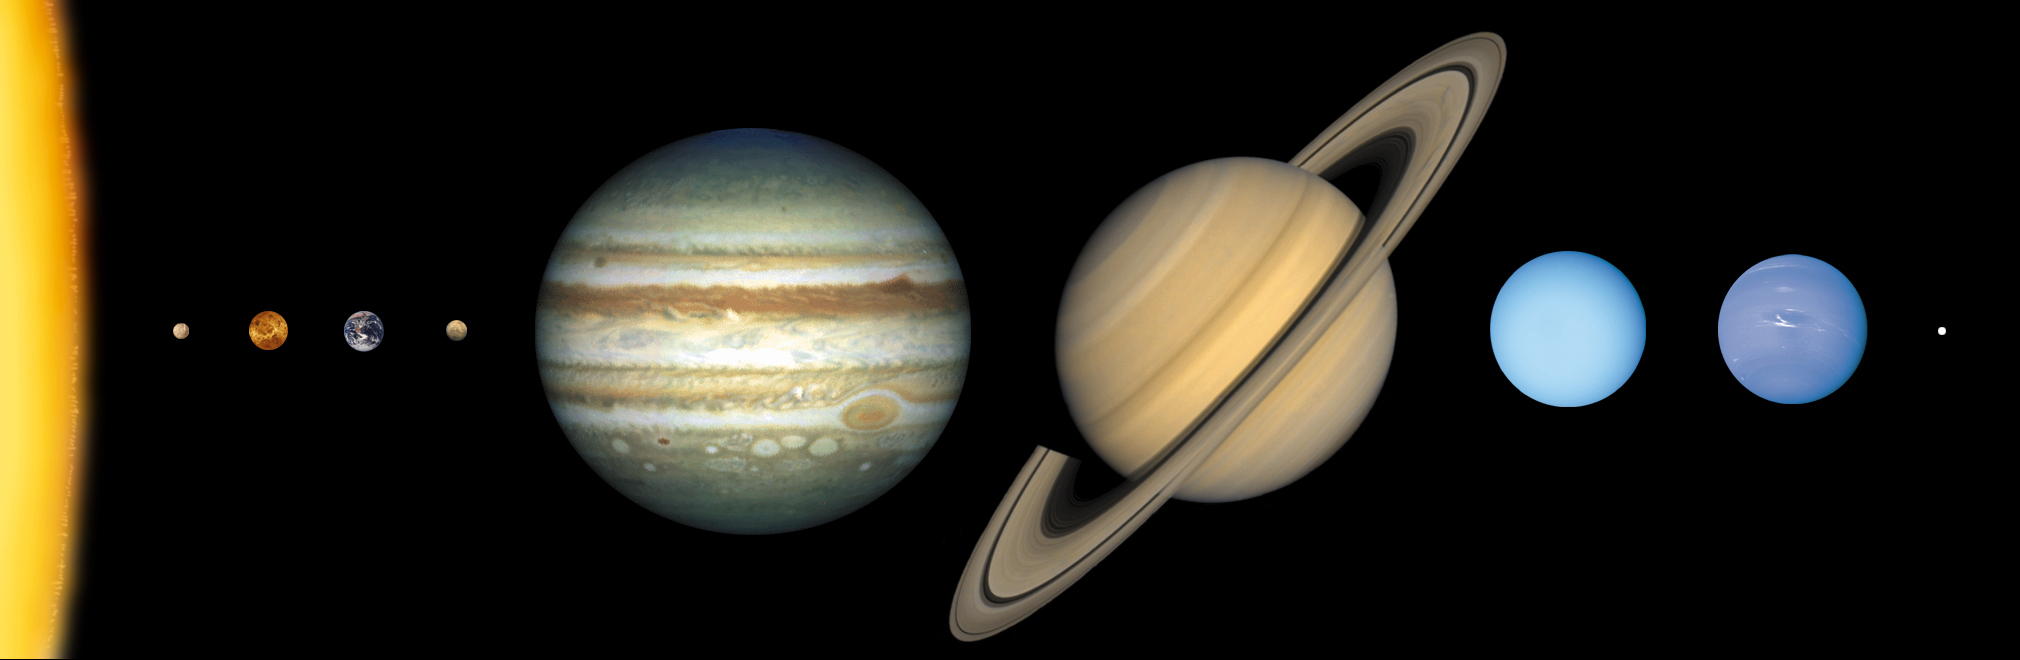 10 Things in Space That Come in Twos – NASA Solar System Exploration